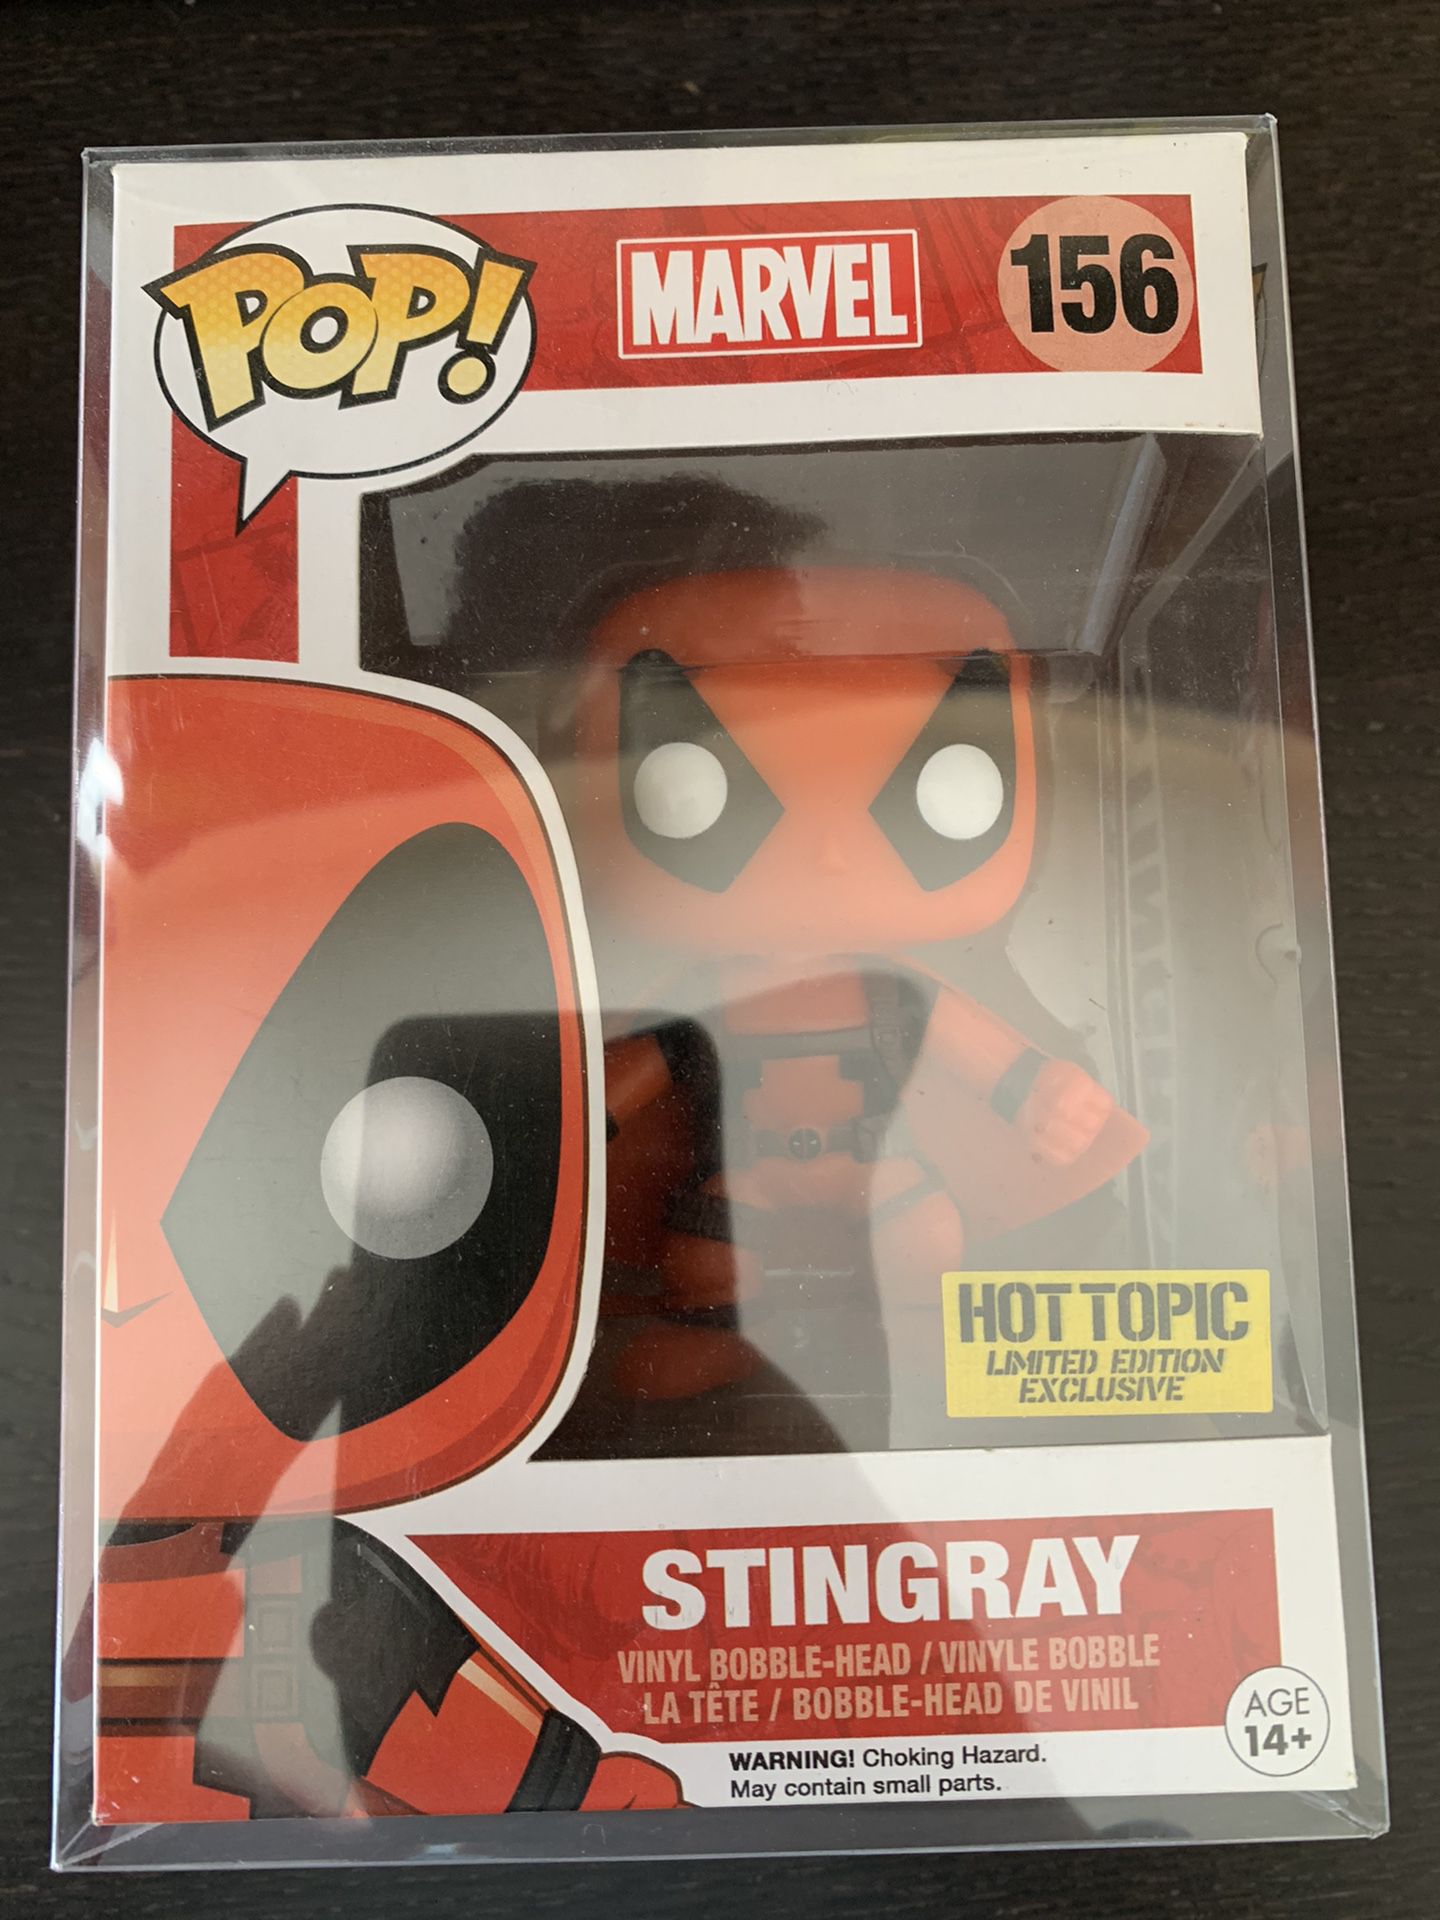 Slap Stick and Sting Ray (Deadpool) HotTopic Exclusives